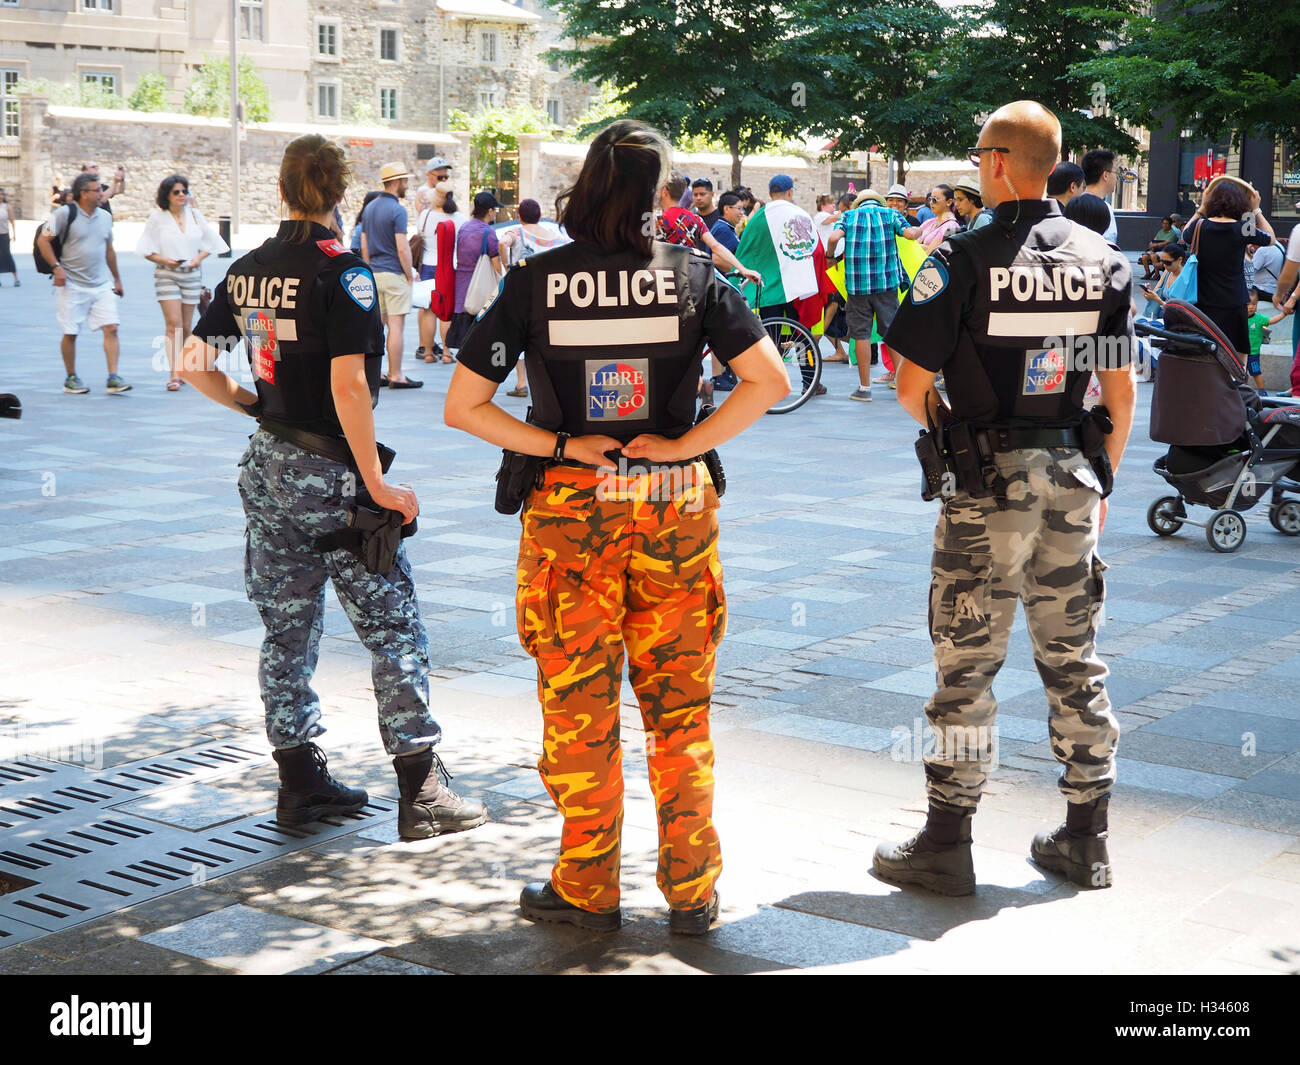 Police officers wearing combat pants, Montreal, Quebec, Canada Stock Photo